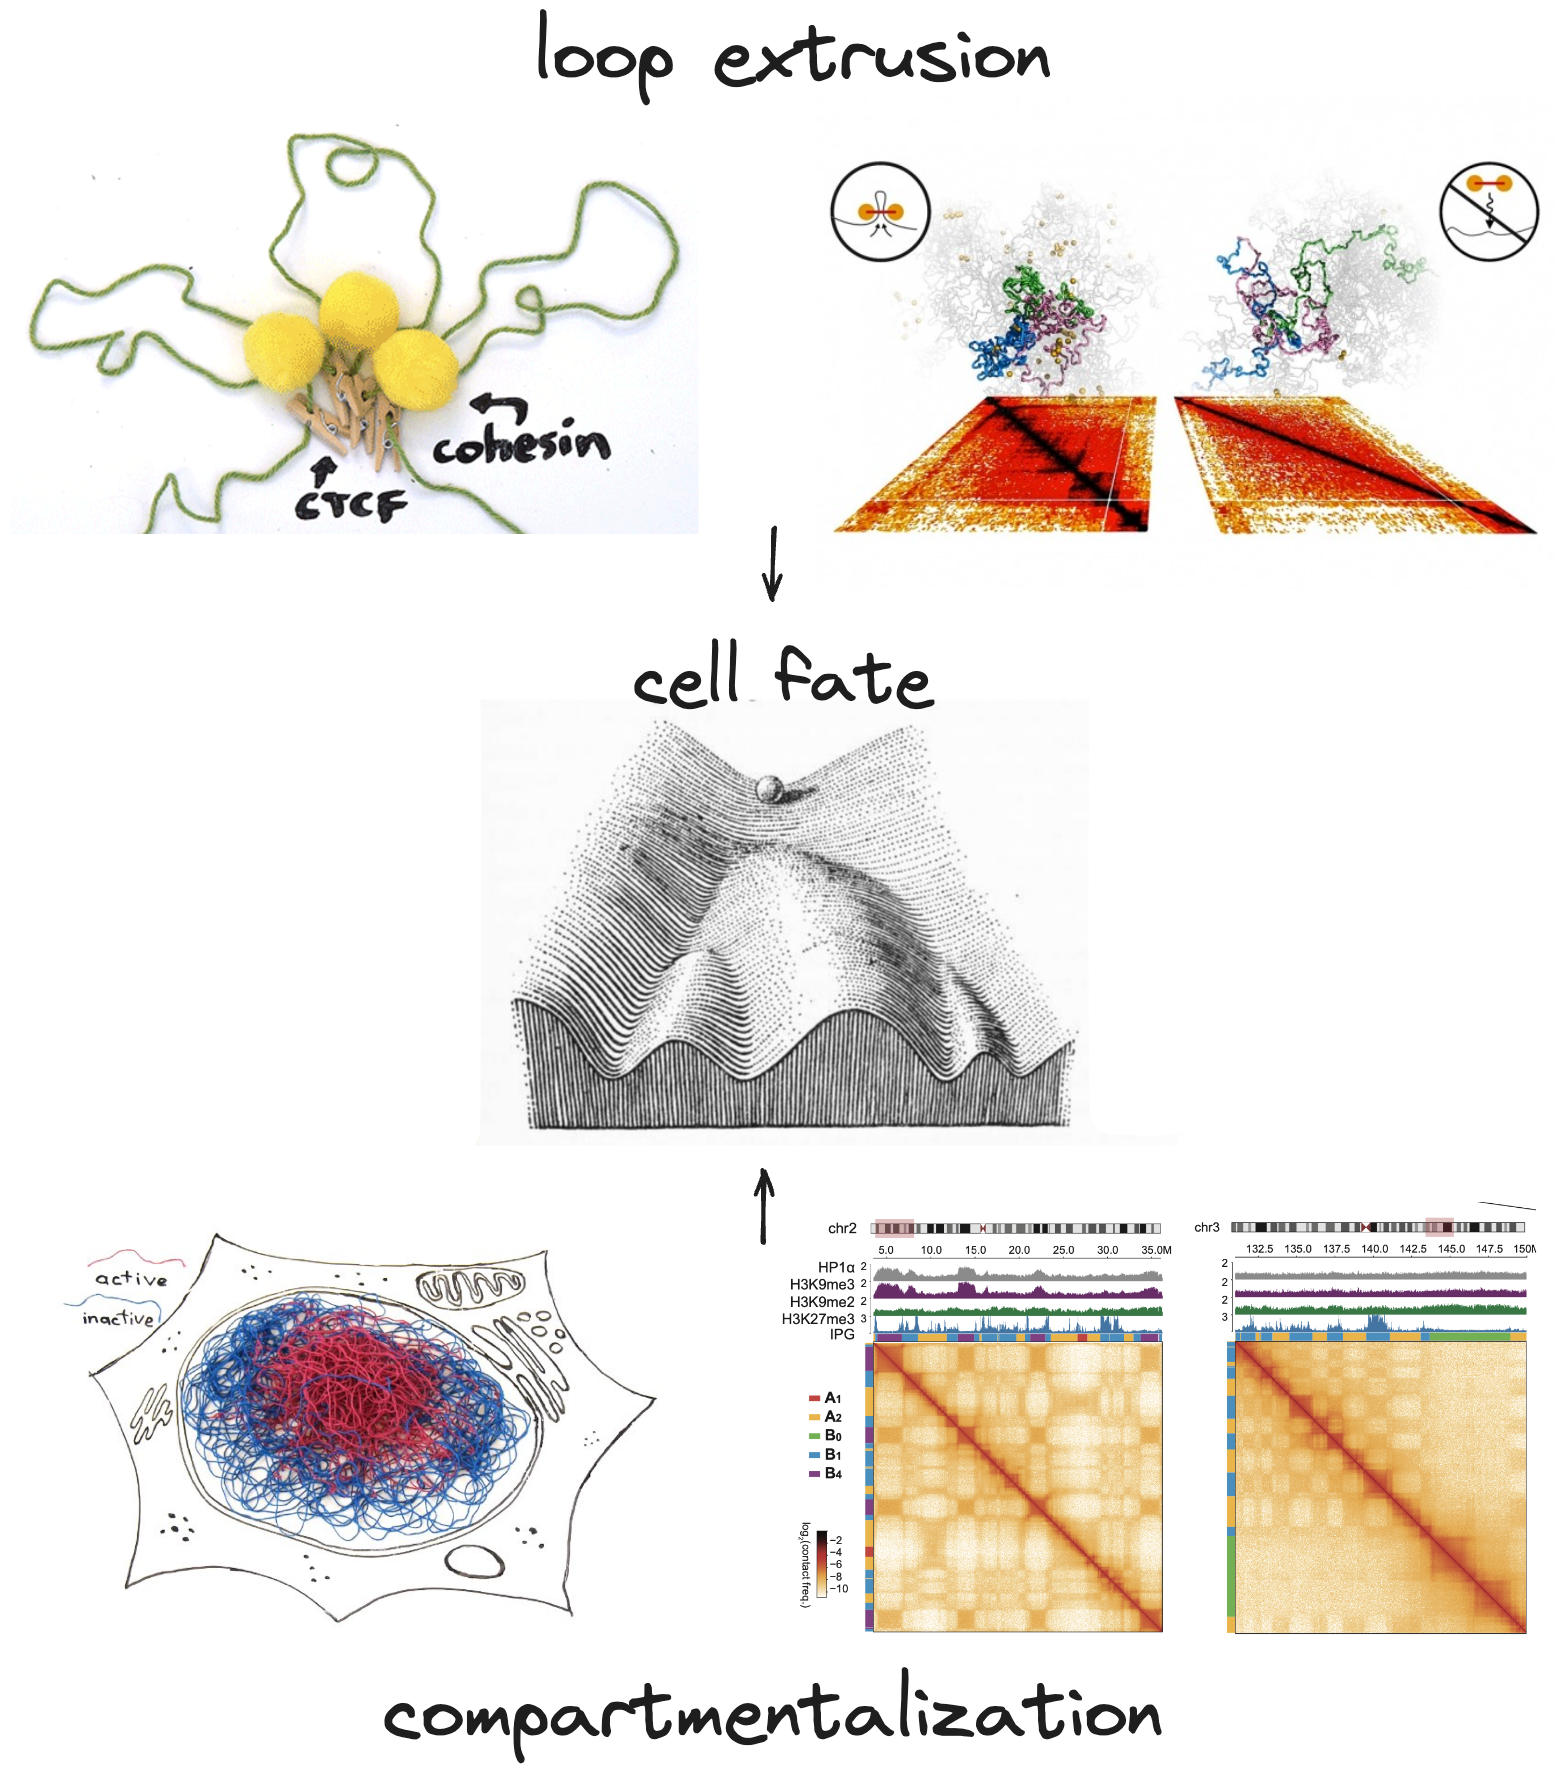 Genome-organizing processes and cell fate